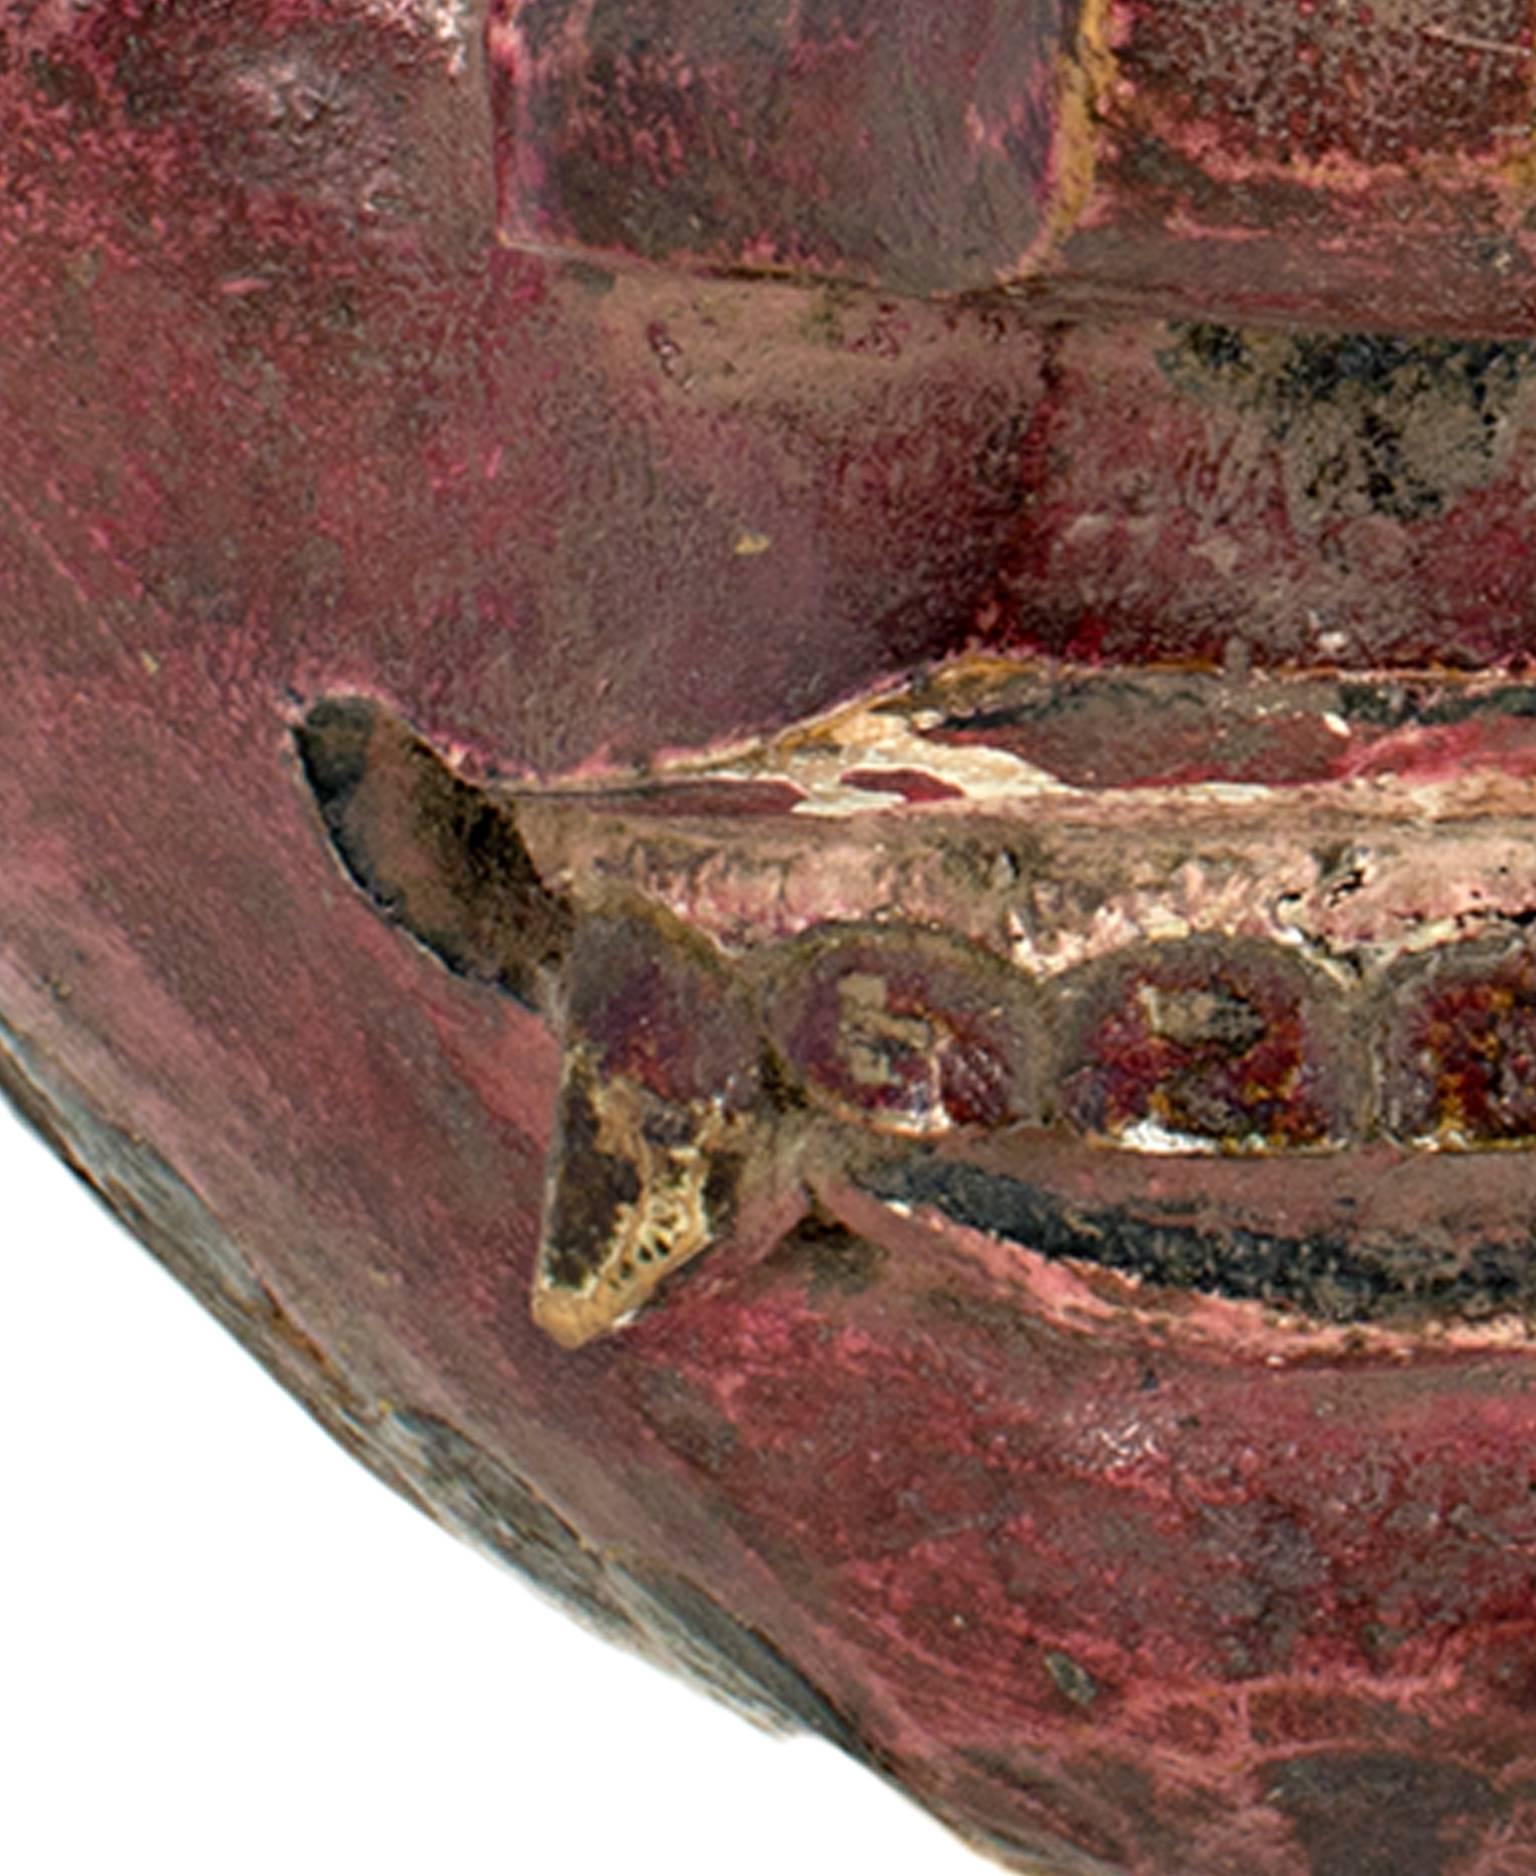 This mask, which features a face with round eyes, fangs, and a beet red face, was created by an unknown Indonesian artist. It is approximately 7 1/2